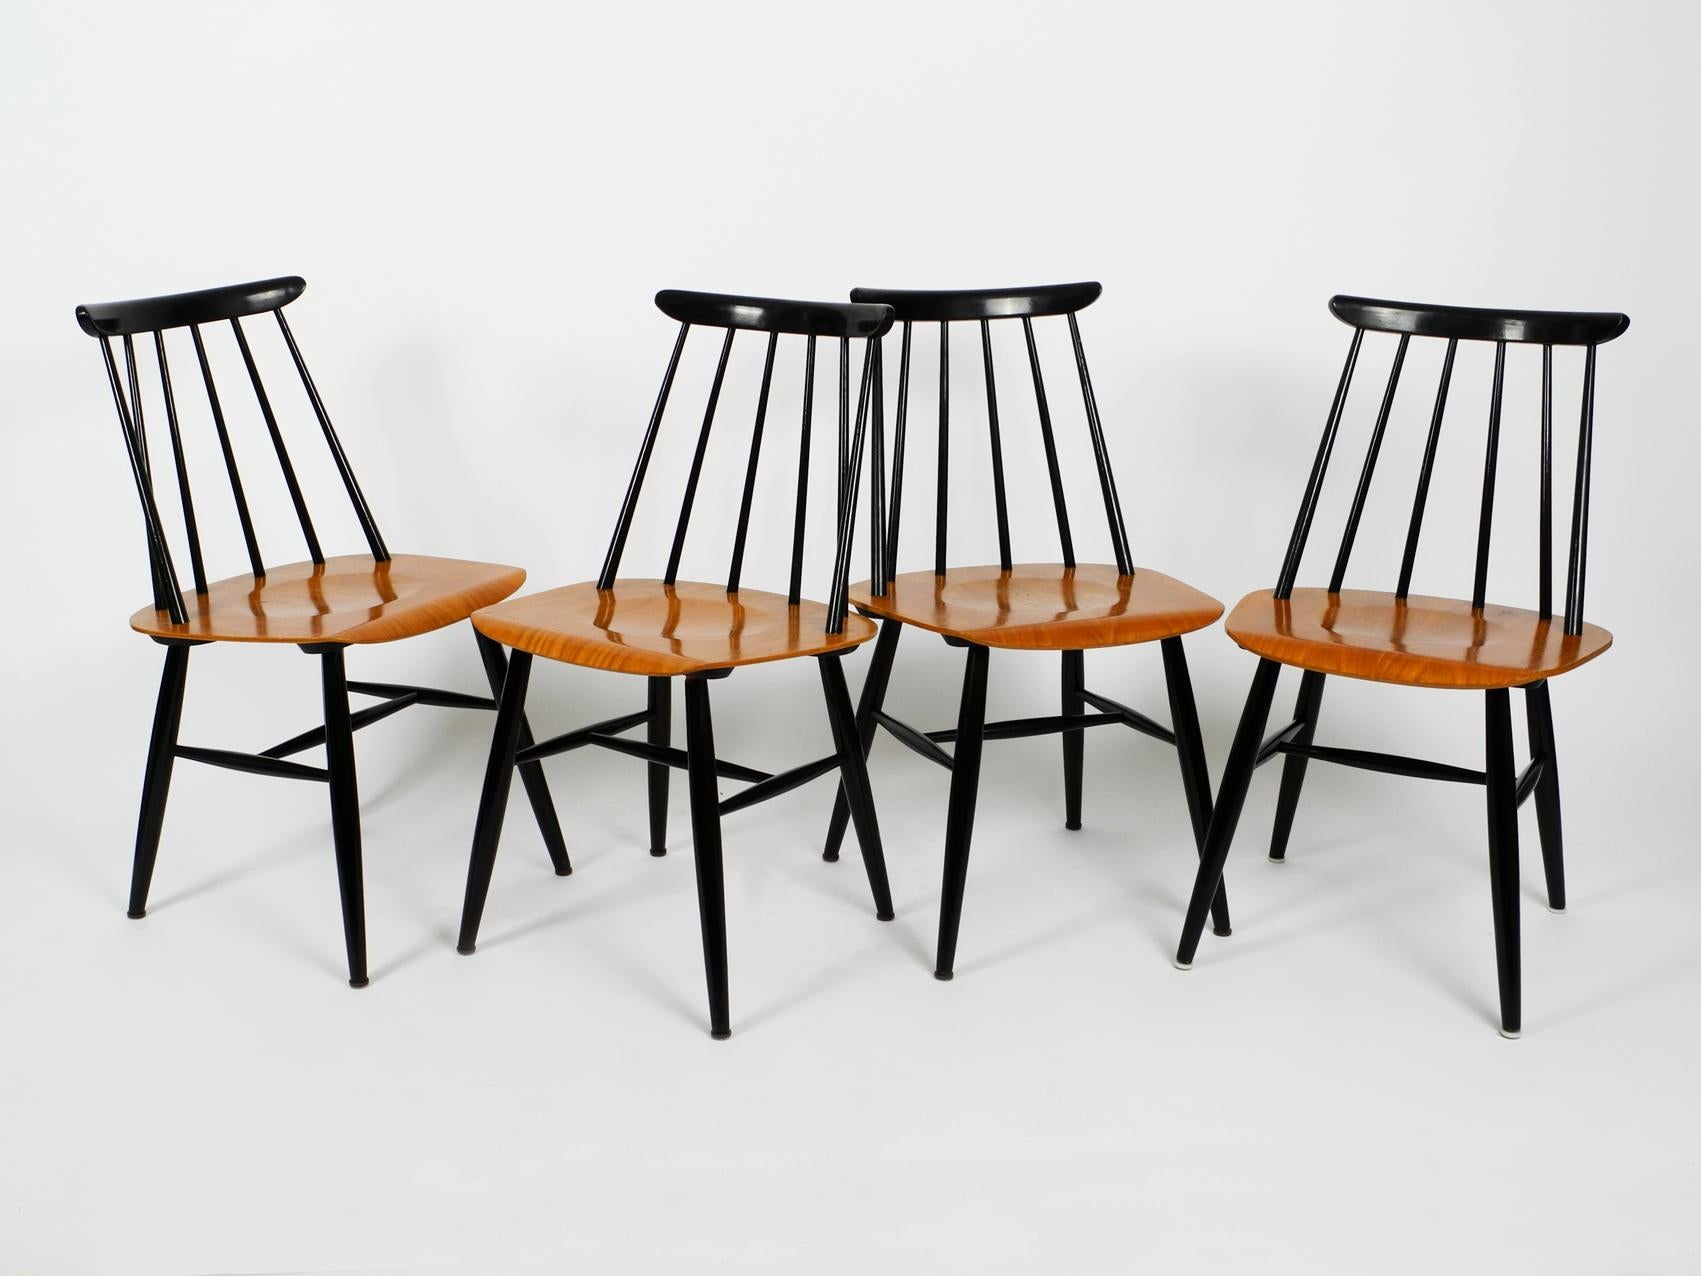 Set of 4 original Fanett chairs by Ilmari Tapiovaara. Made by Asko. Made in Finland.
Plywood with teak veneer, with black lacquered legs and backrest. In very good original condition. Never repaired or repainted. All four chairs are with original